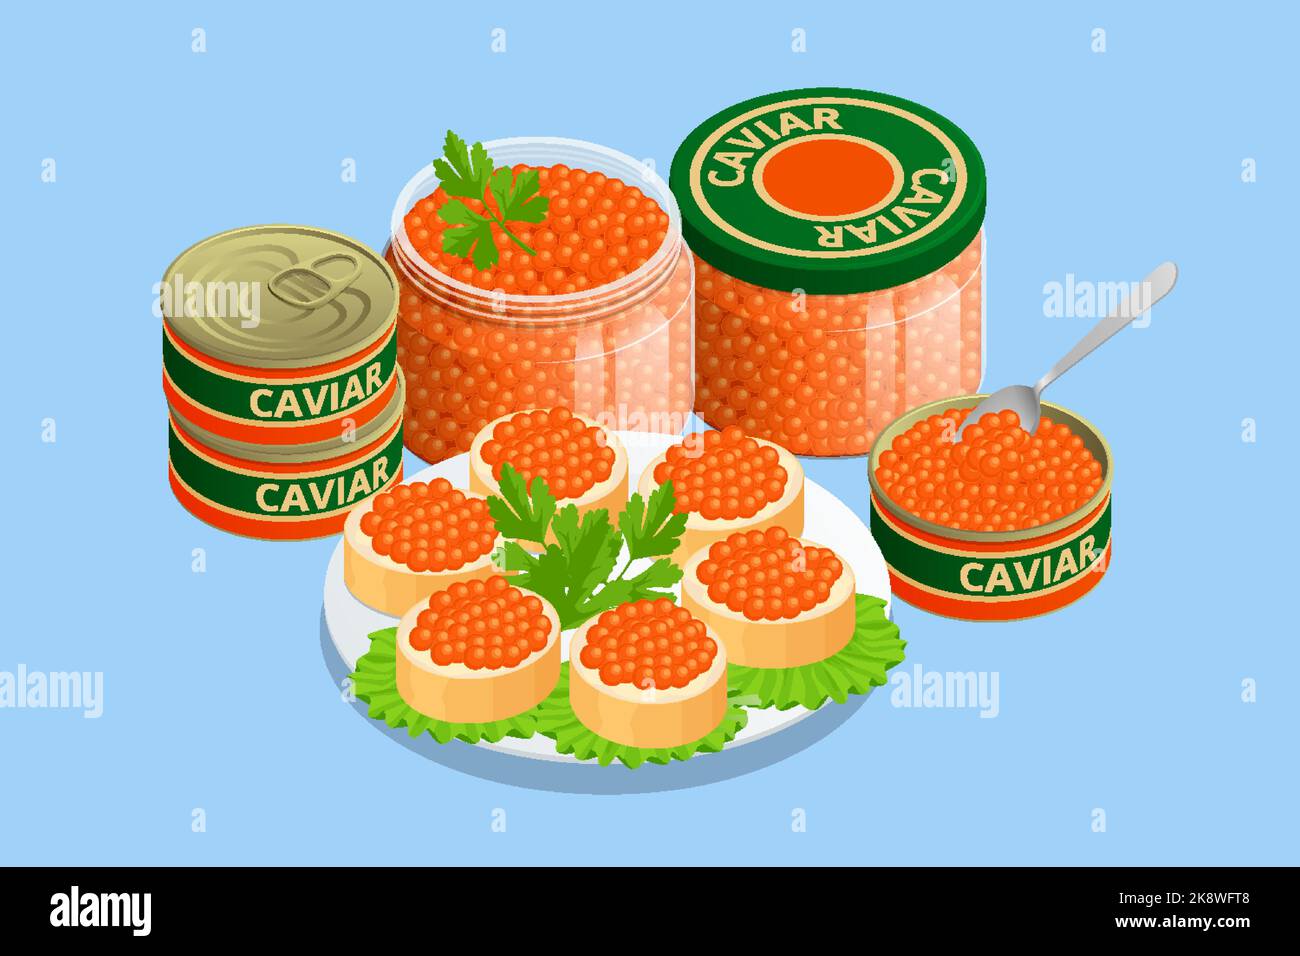 Isometric can of chum salmon caviar and sandwich. Glass jar with large chum salmon caviar, caviar in a tin can. Healthy food, seafood. Stock Vector